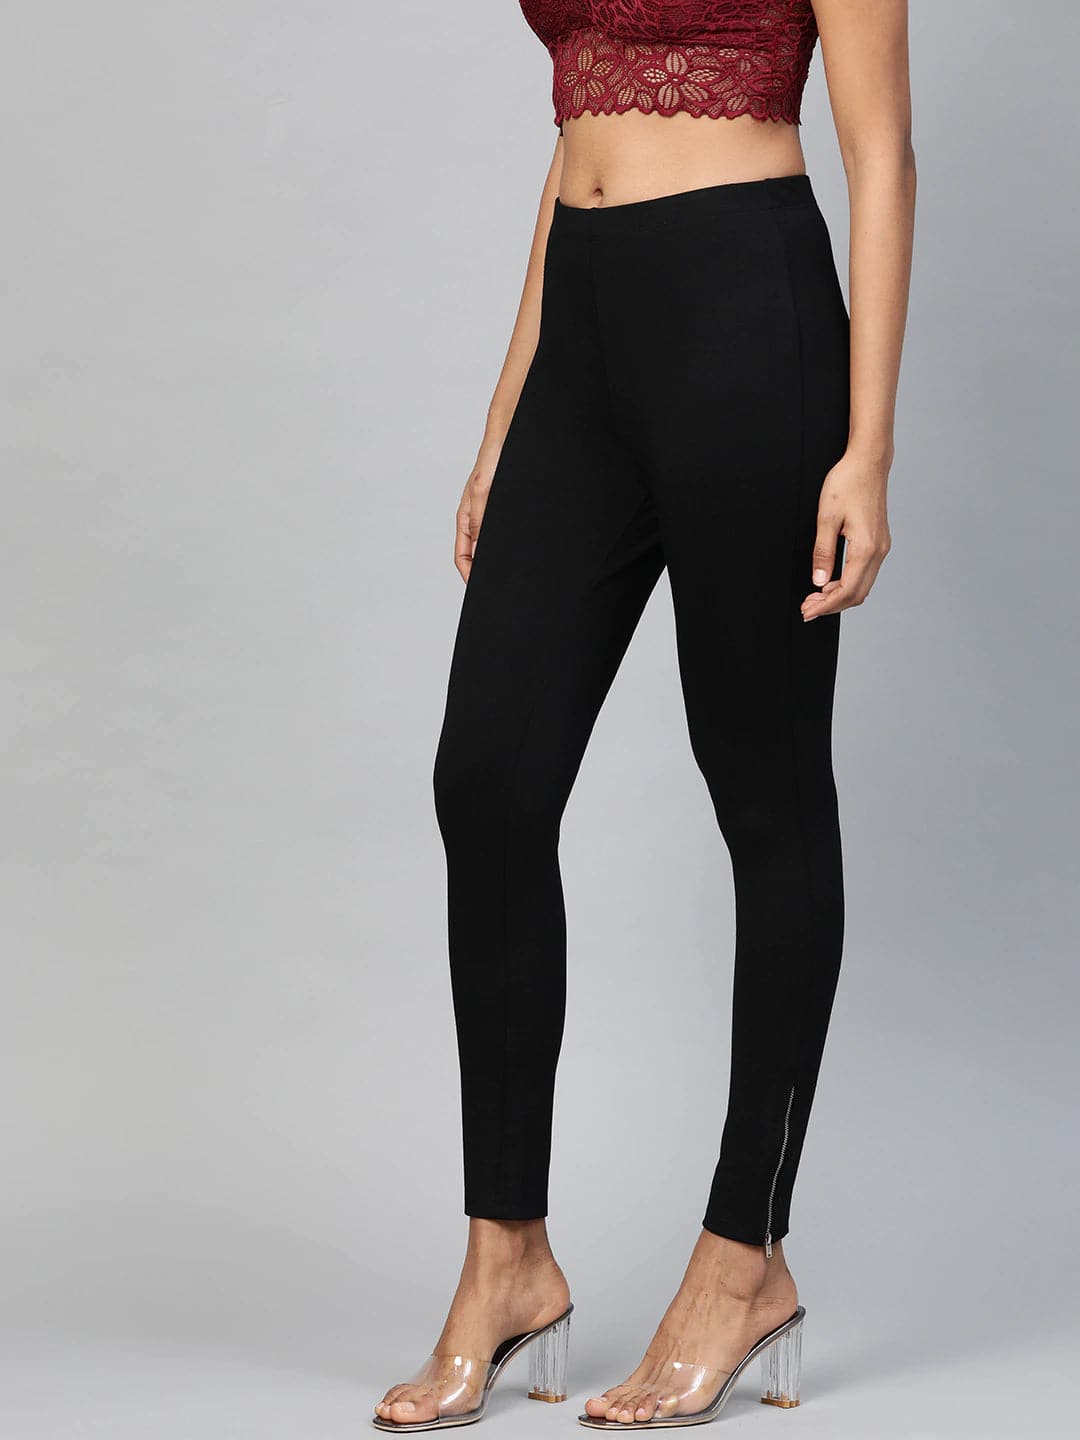 Womens Jeggings - Buy Womens Jeggings Online at Best Prices In